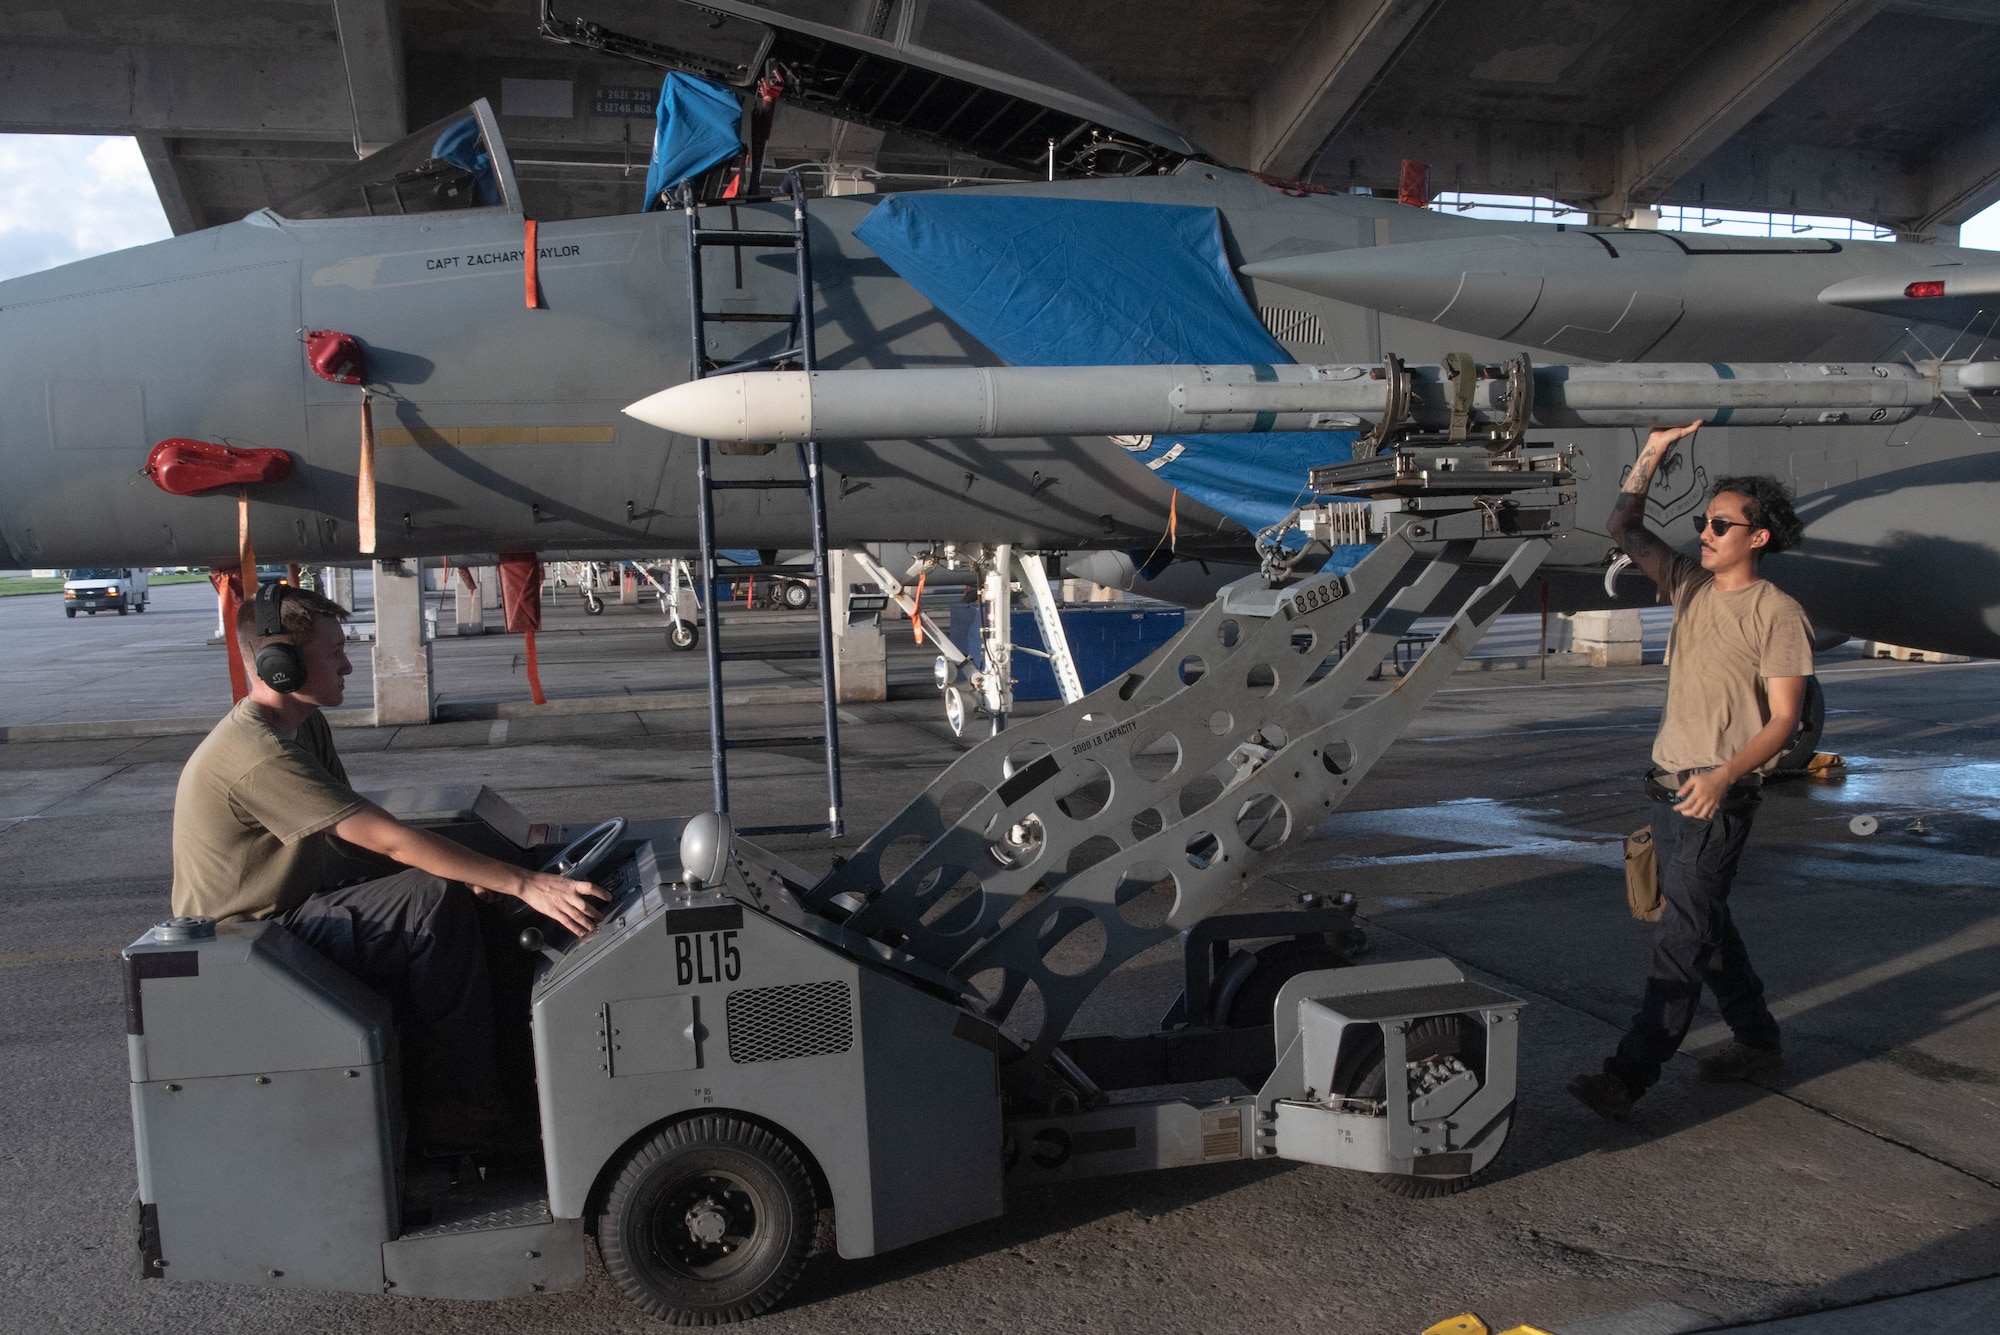 Airmen from the 44th AMU operate machinery and remove munitions from a F-15C